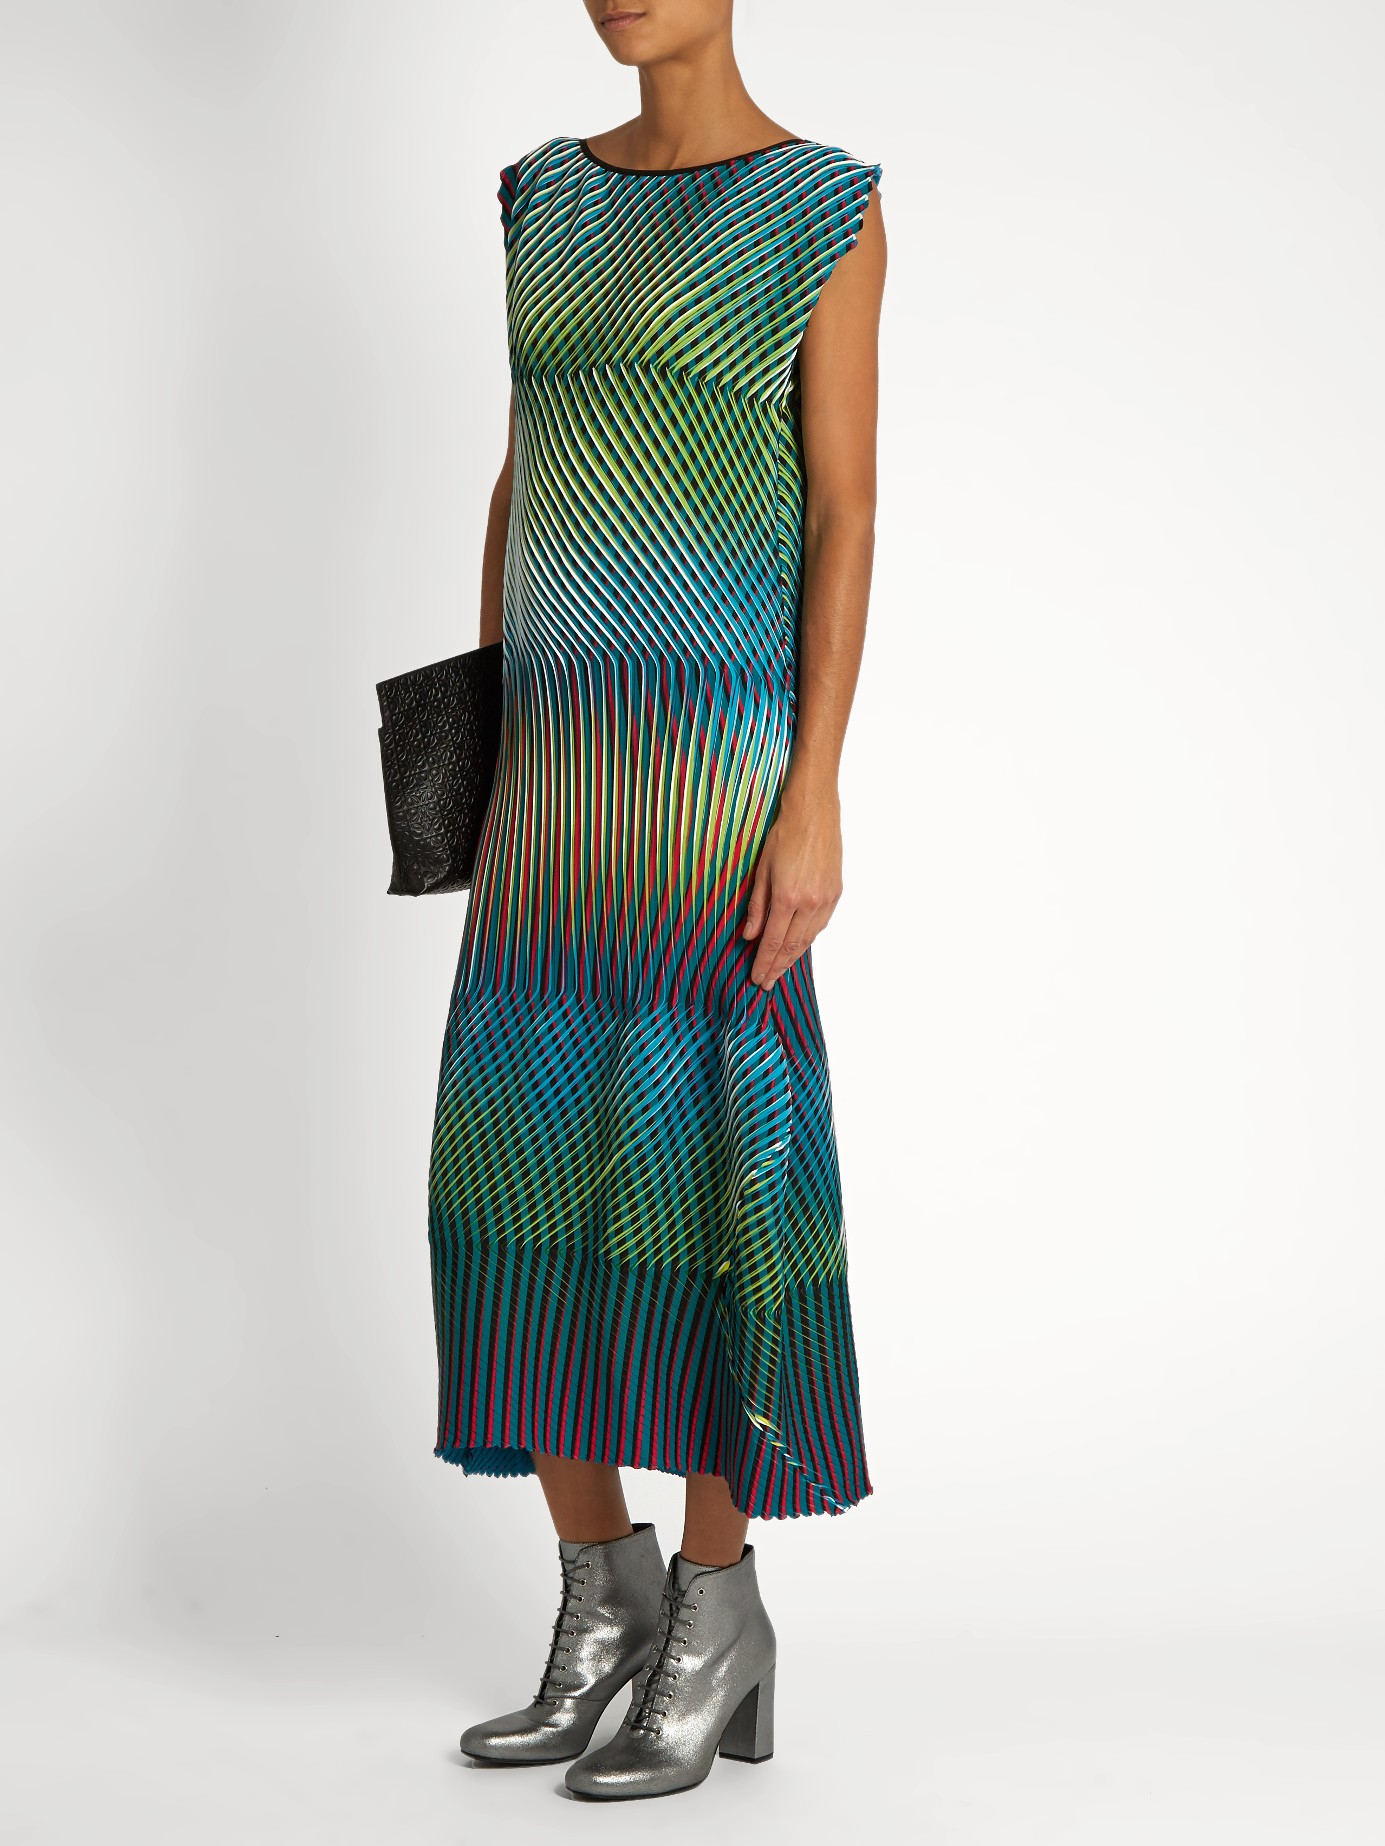 Lyst - Issey Miyake Prism 2 Striped And Pleated Midi Dress in Blue